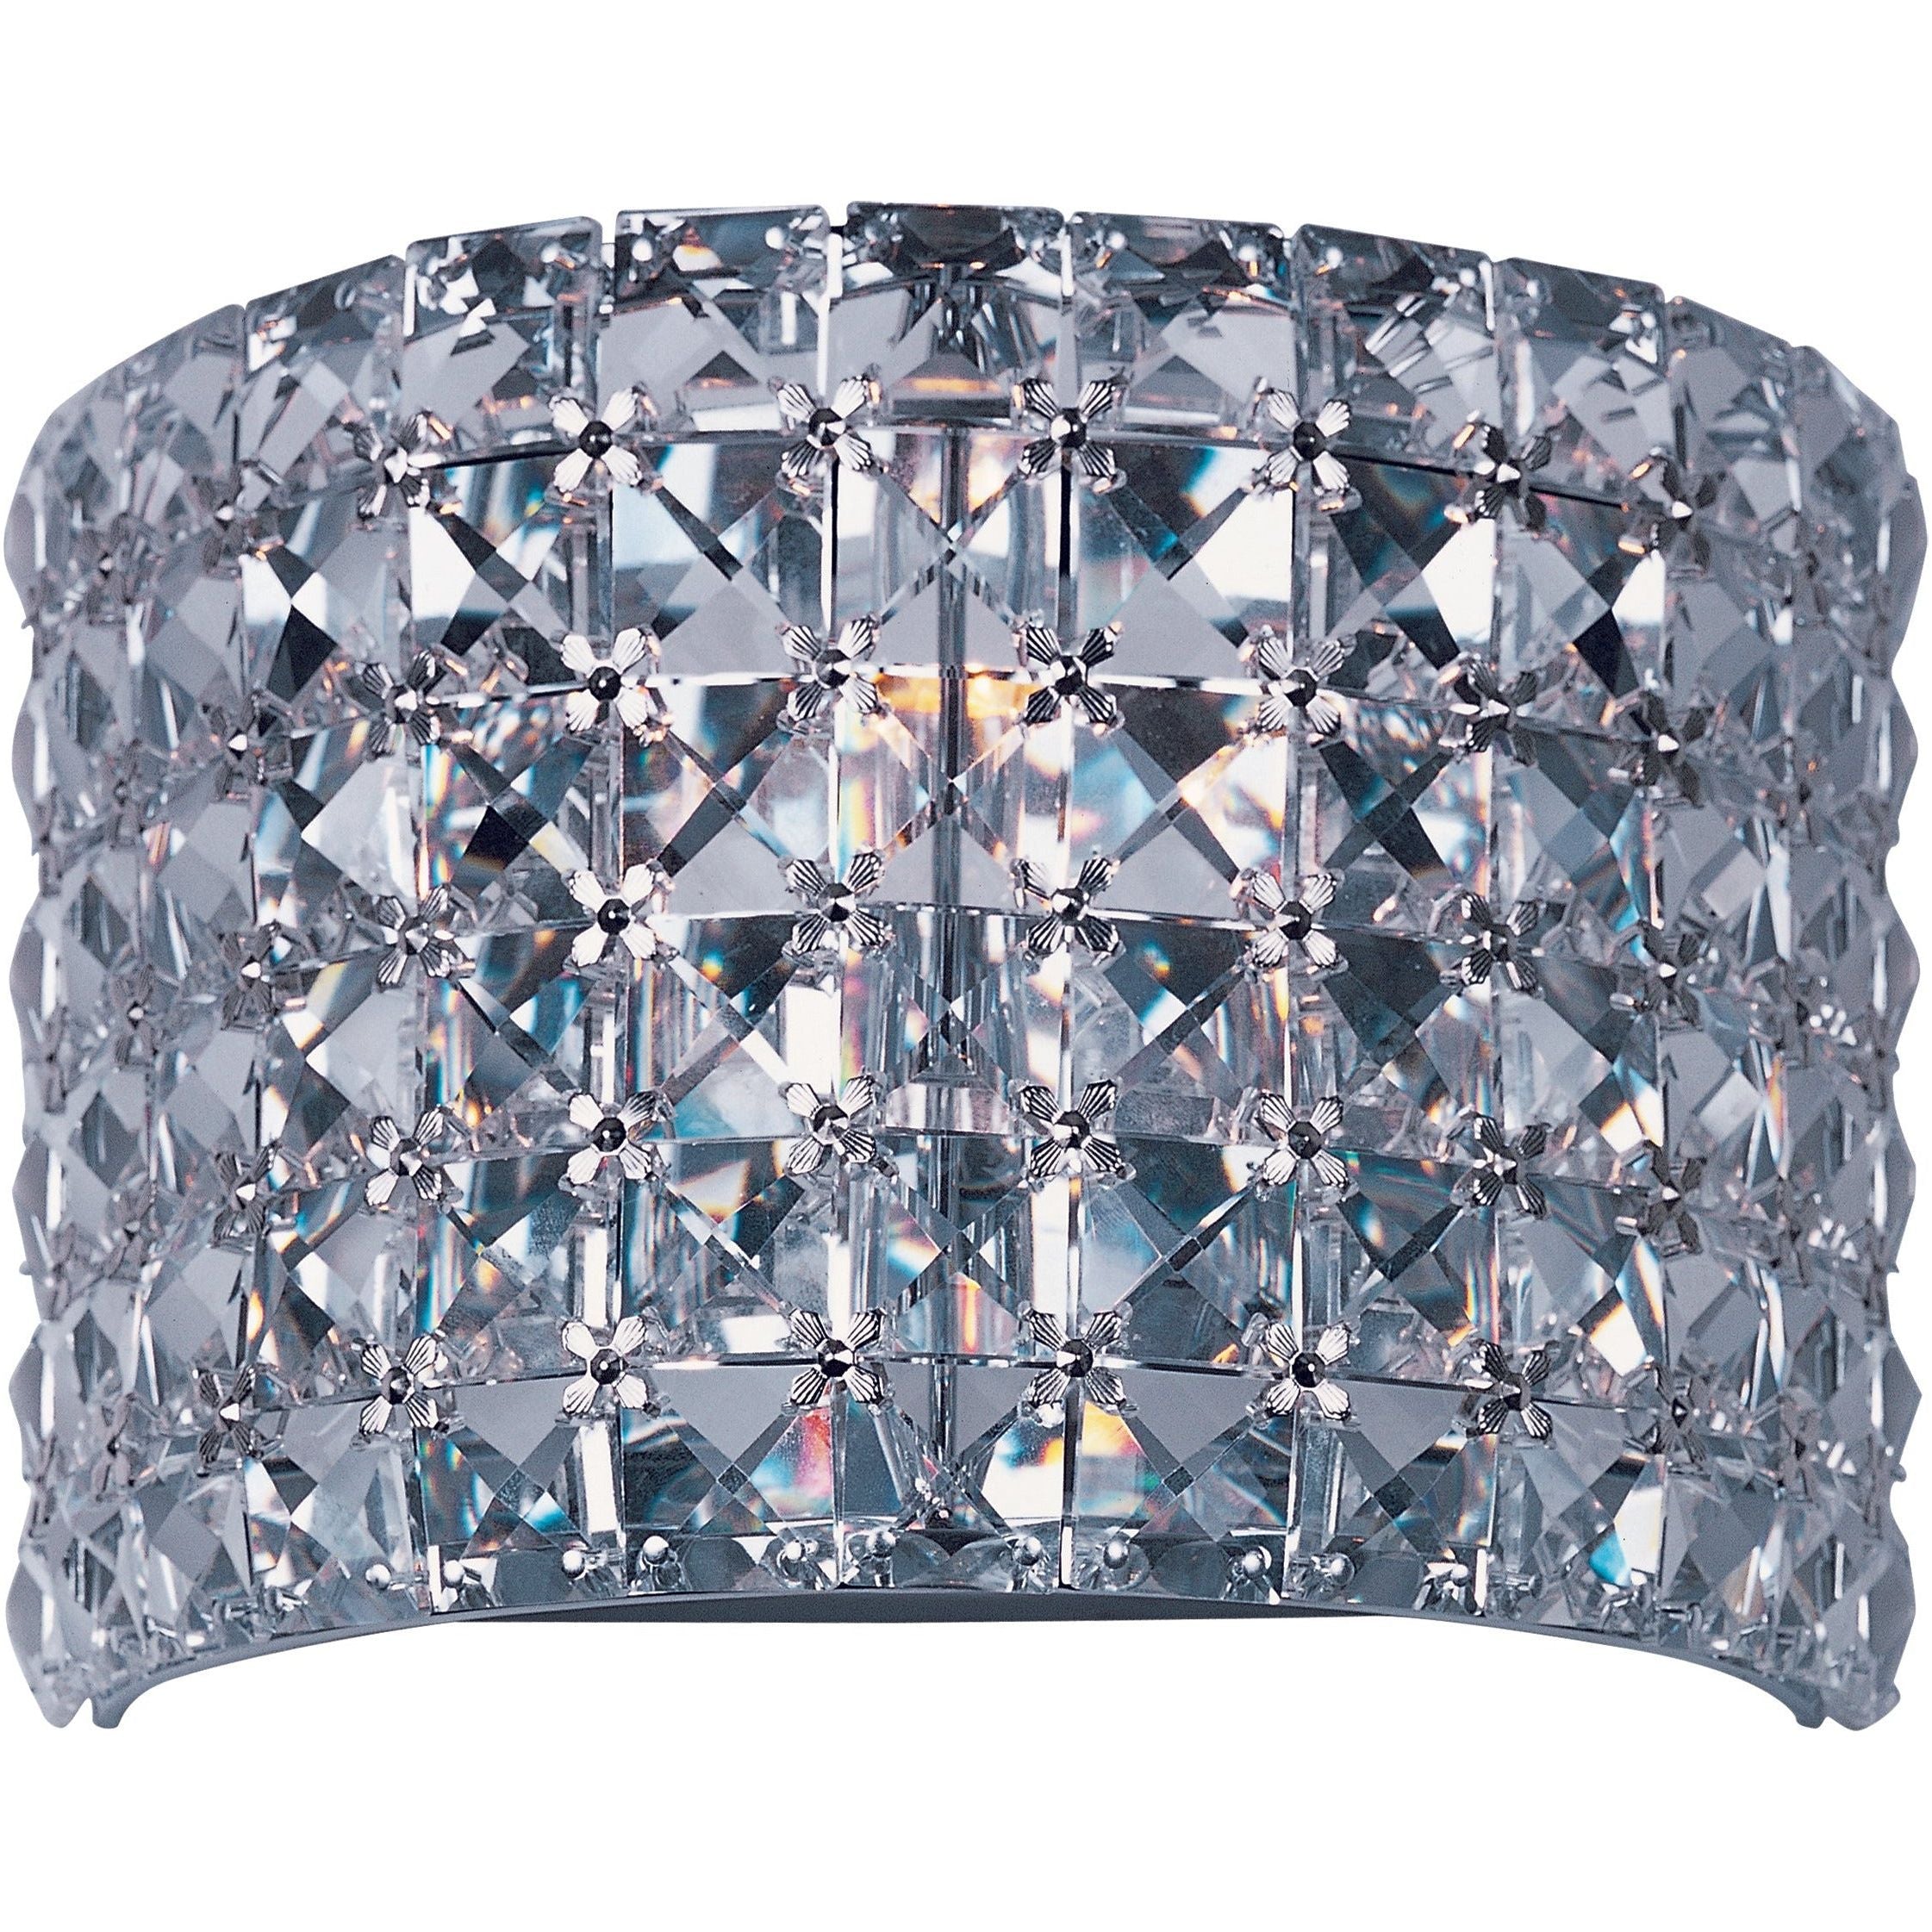 Vision 1-Light Wall Sconce